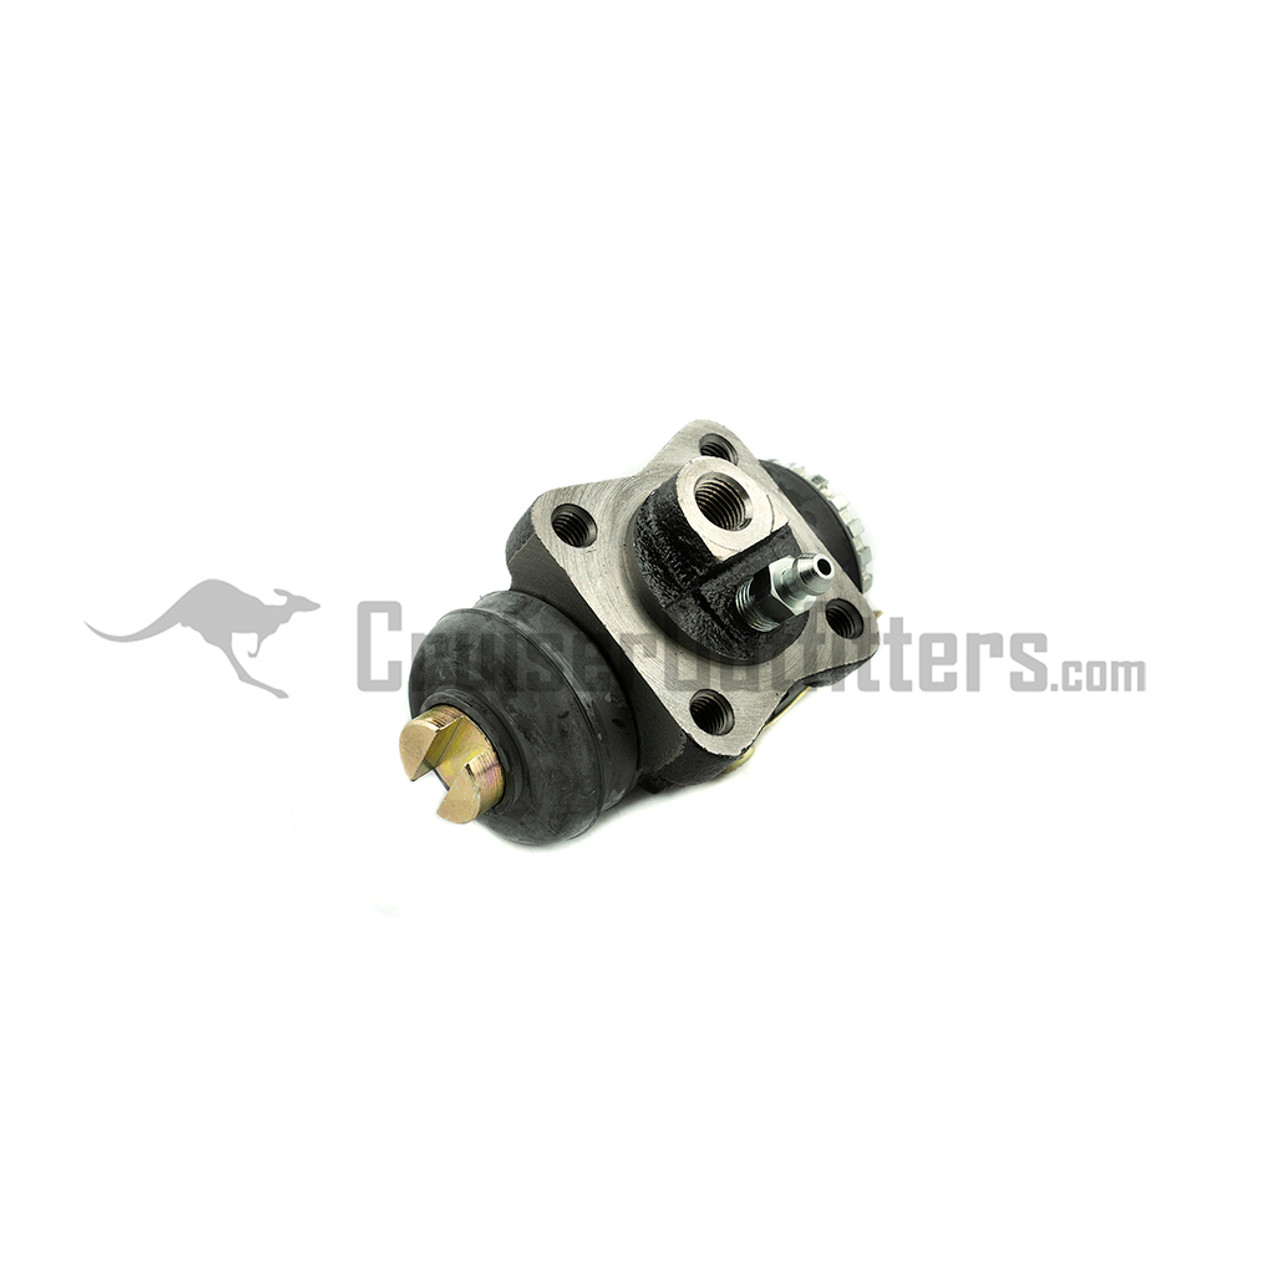 BWCR60090LU - Wheel Cylinder - Rear Top (Front)